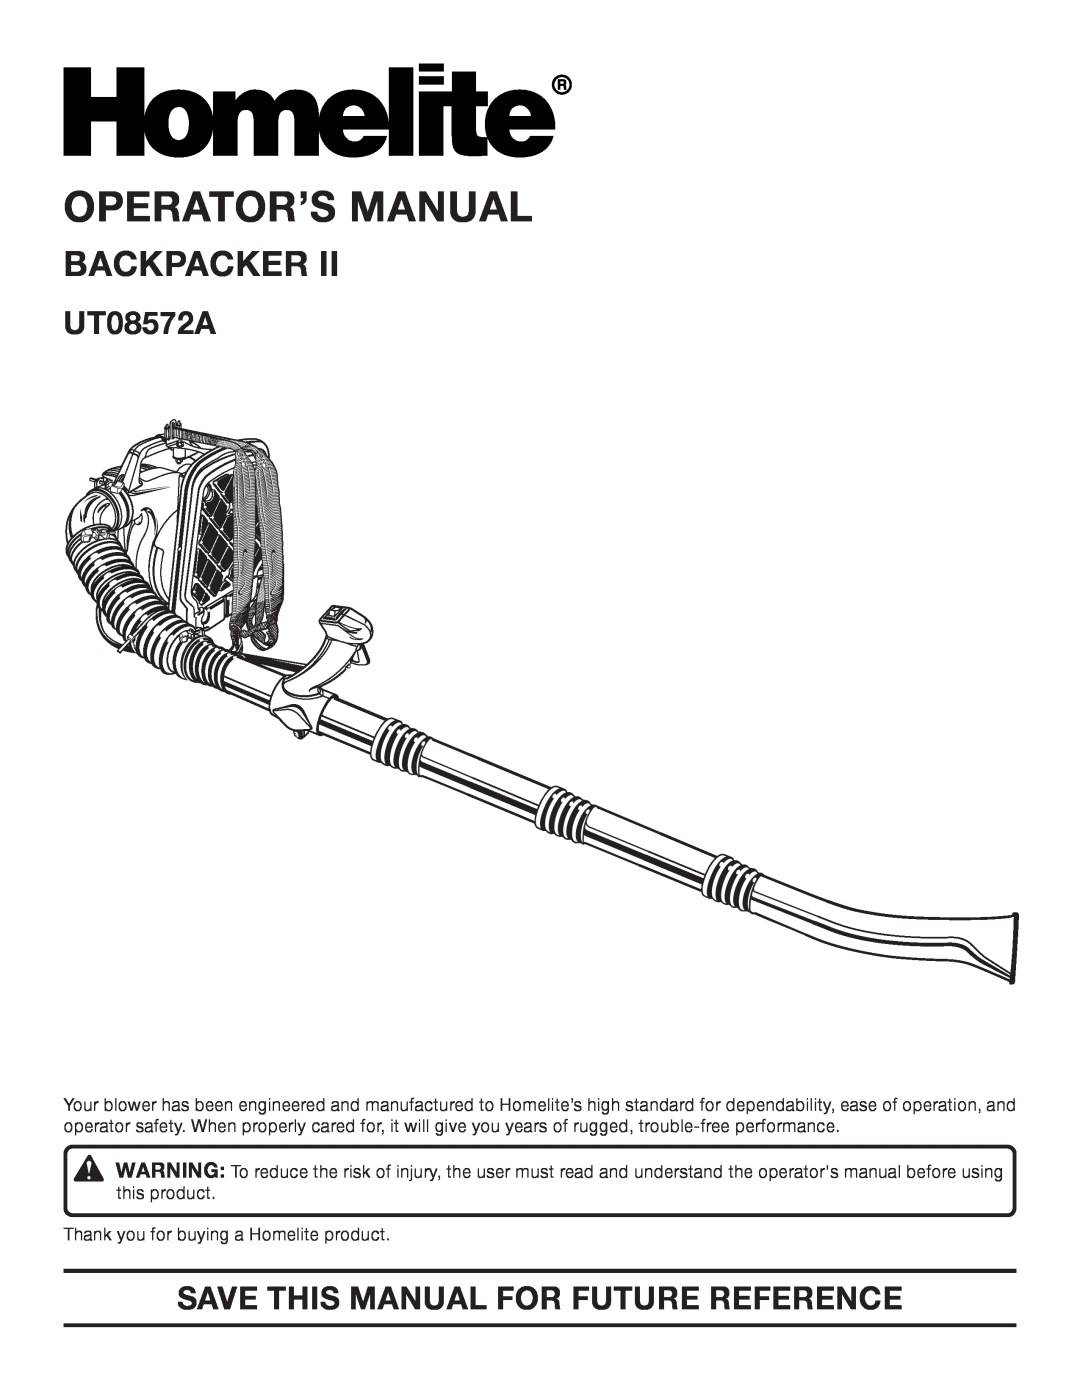 Homelite UT08572A manual Operator’S Manual, Backpacker, Save This Manual For Future Reference 